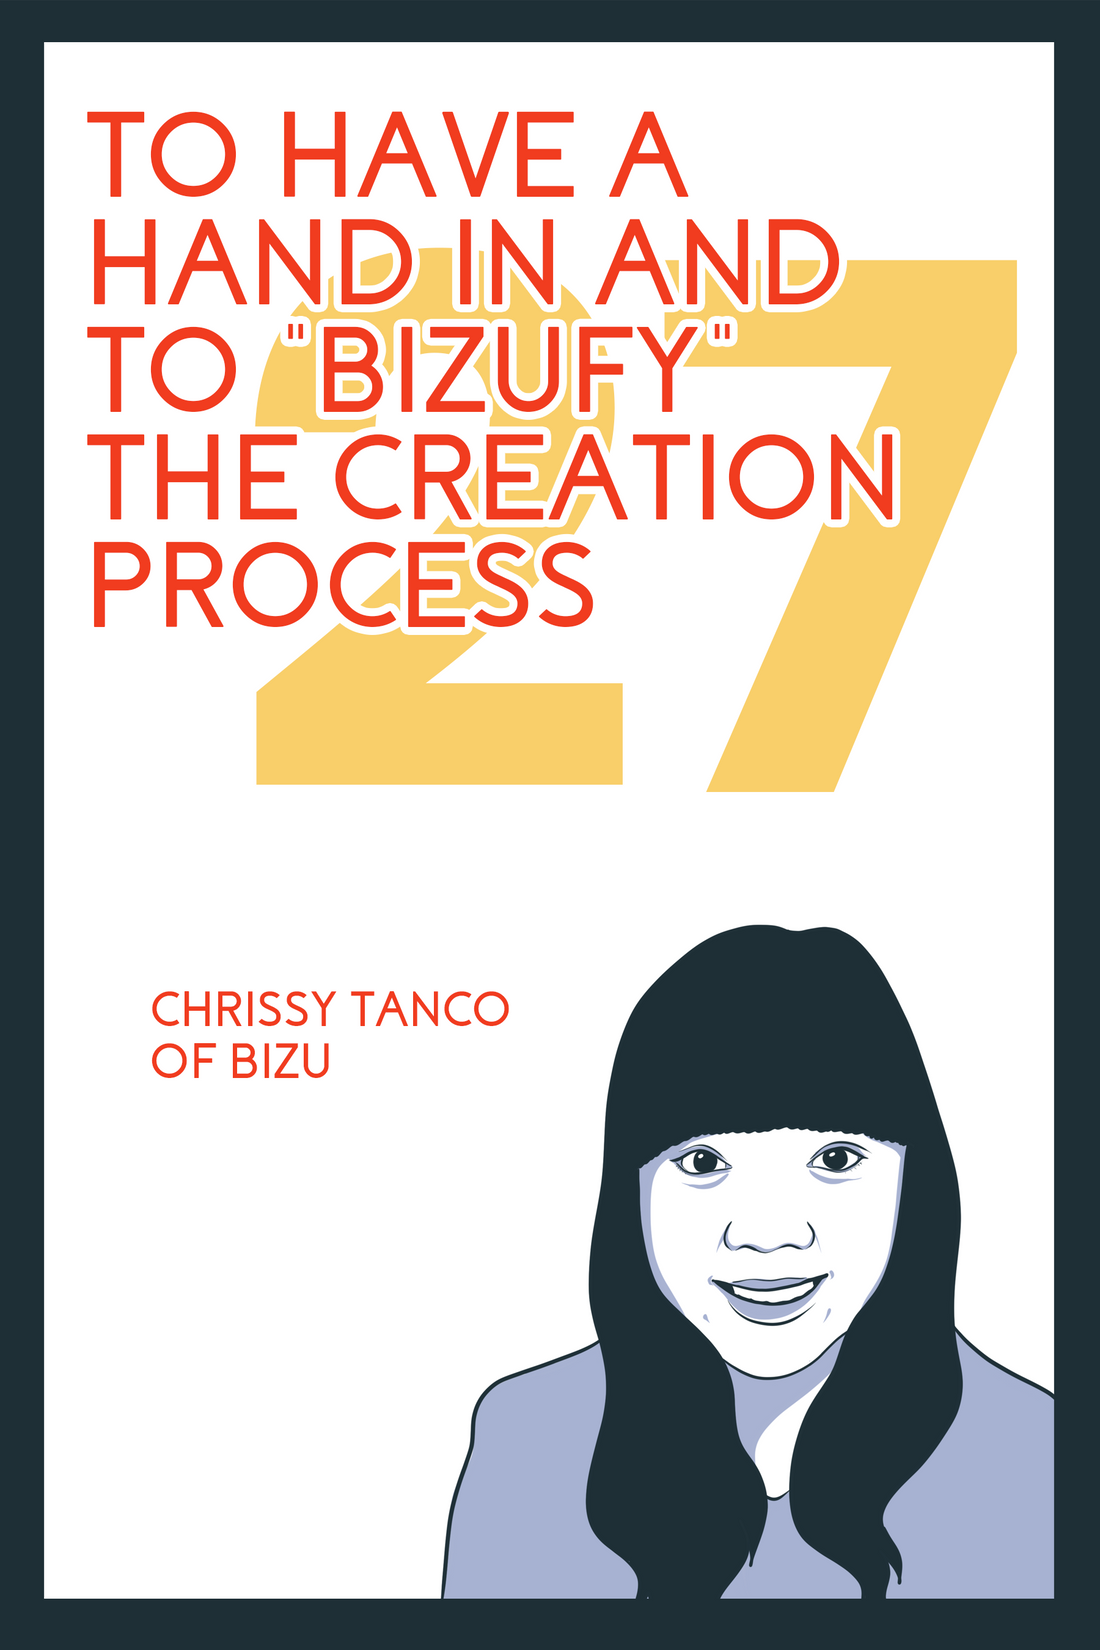 To Have a Hand in And to "Bizufy" the Creation Process